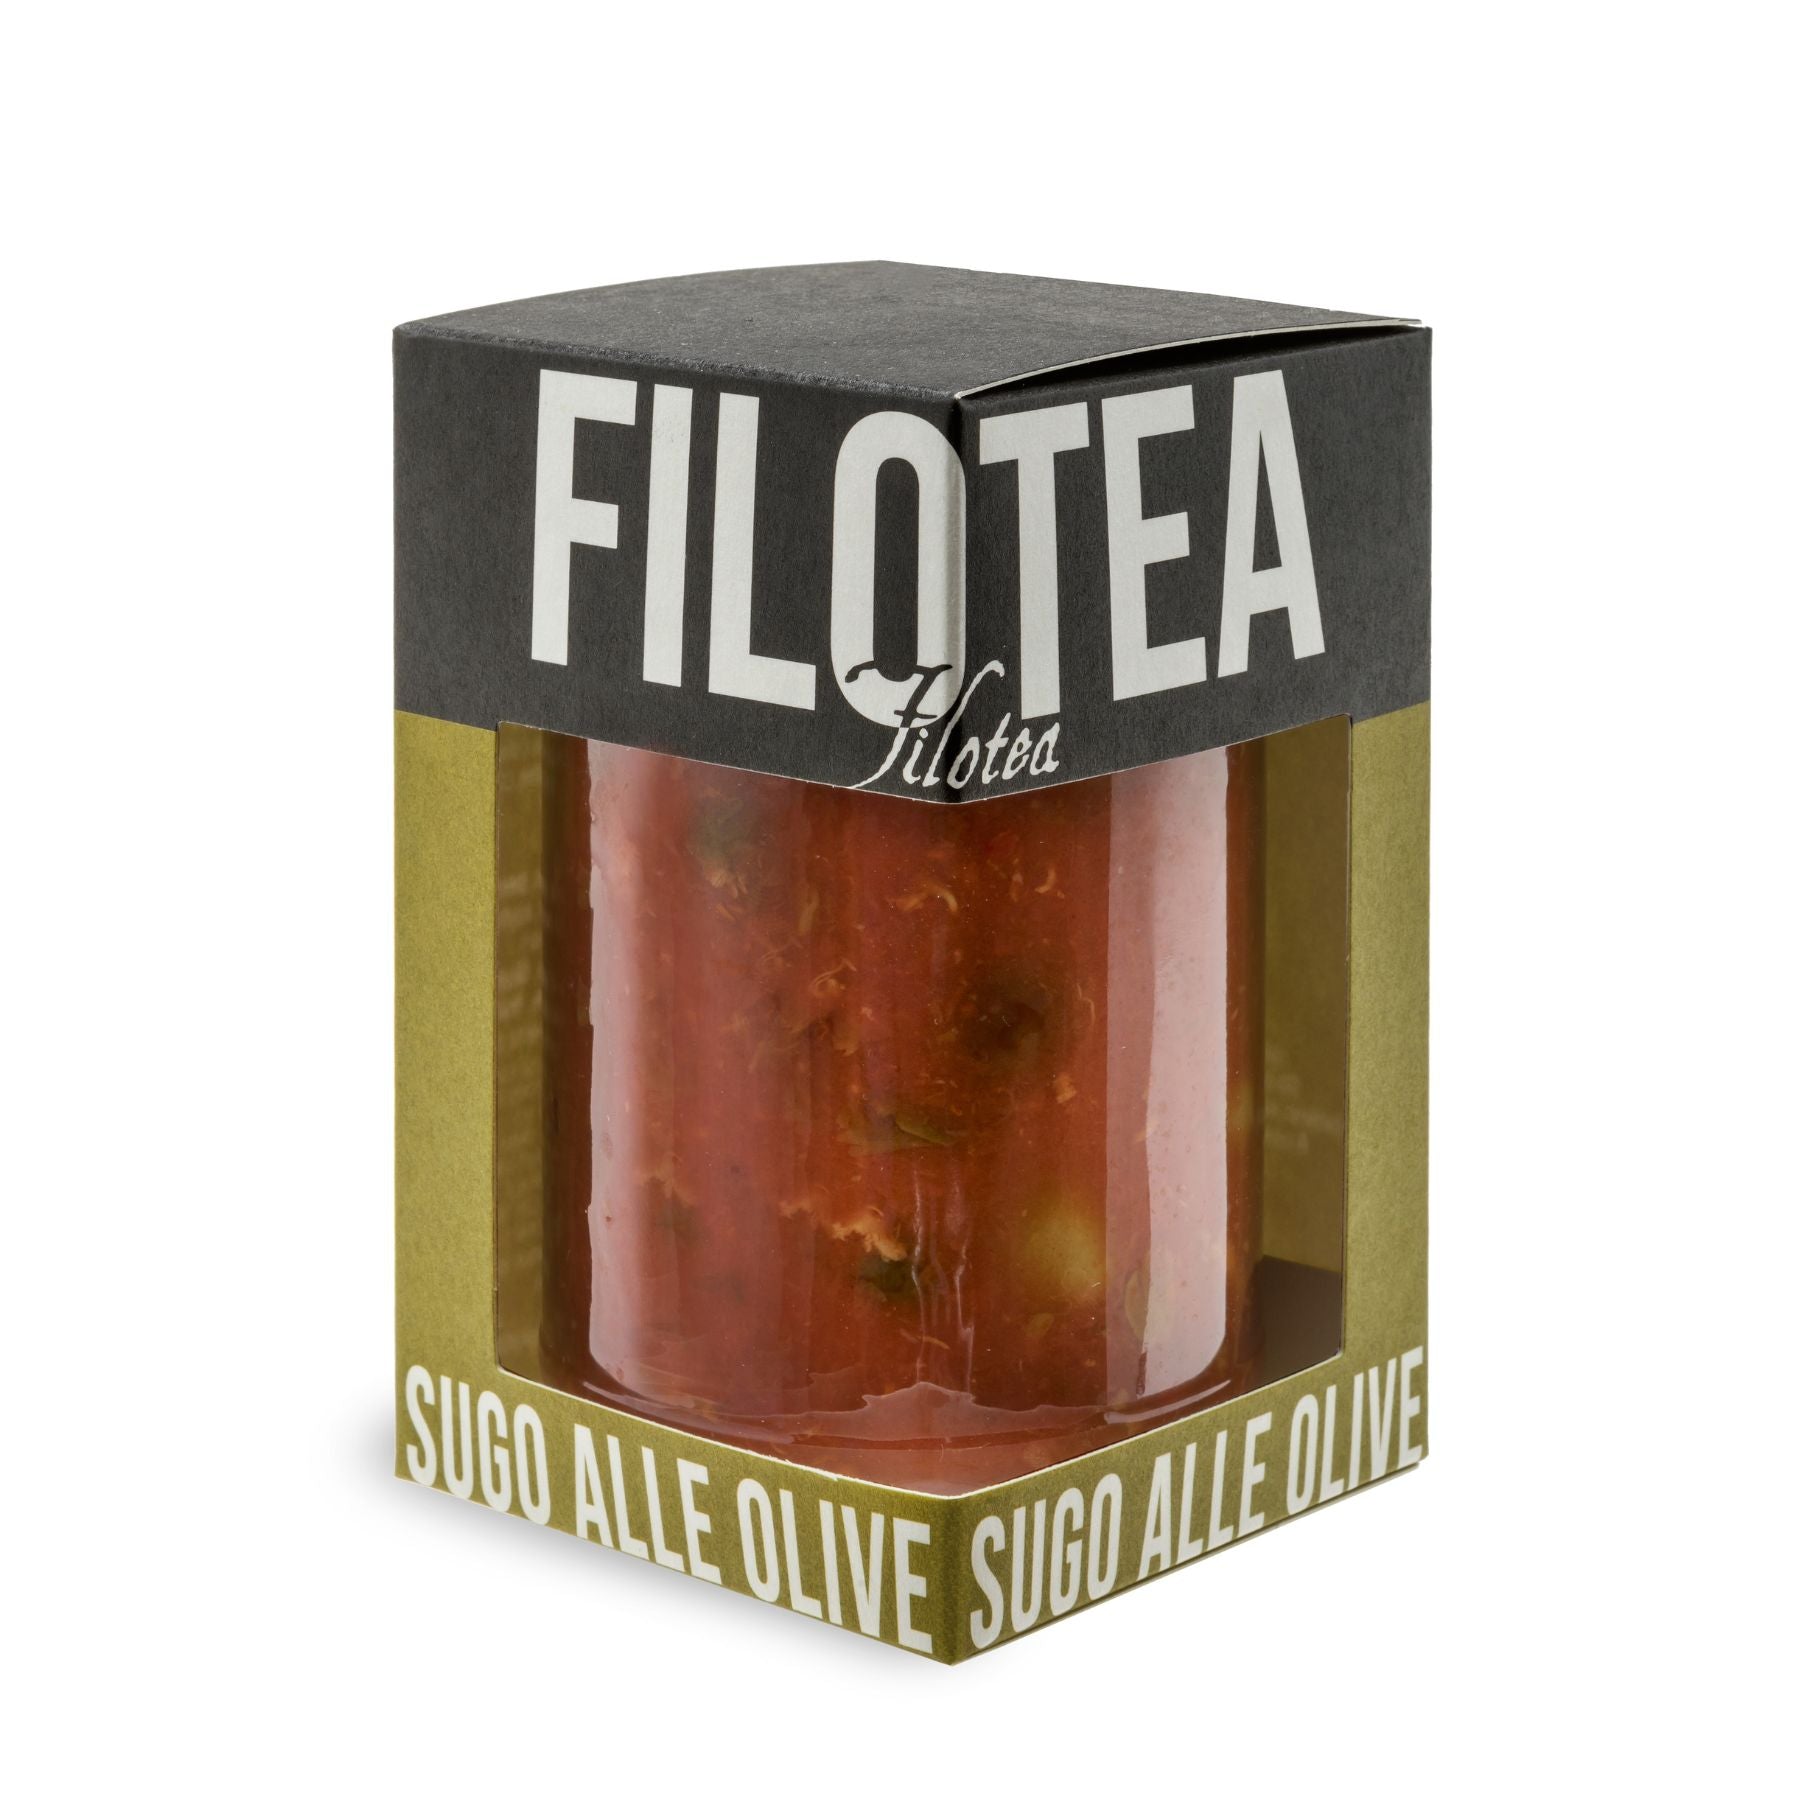 Filotea Filtotea Olive Pasta Sauce 280g | Imported and distributed in the UK by Just Gourmet Foods